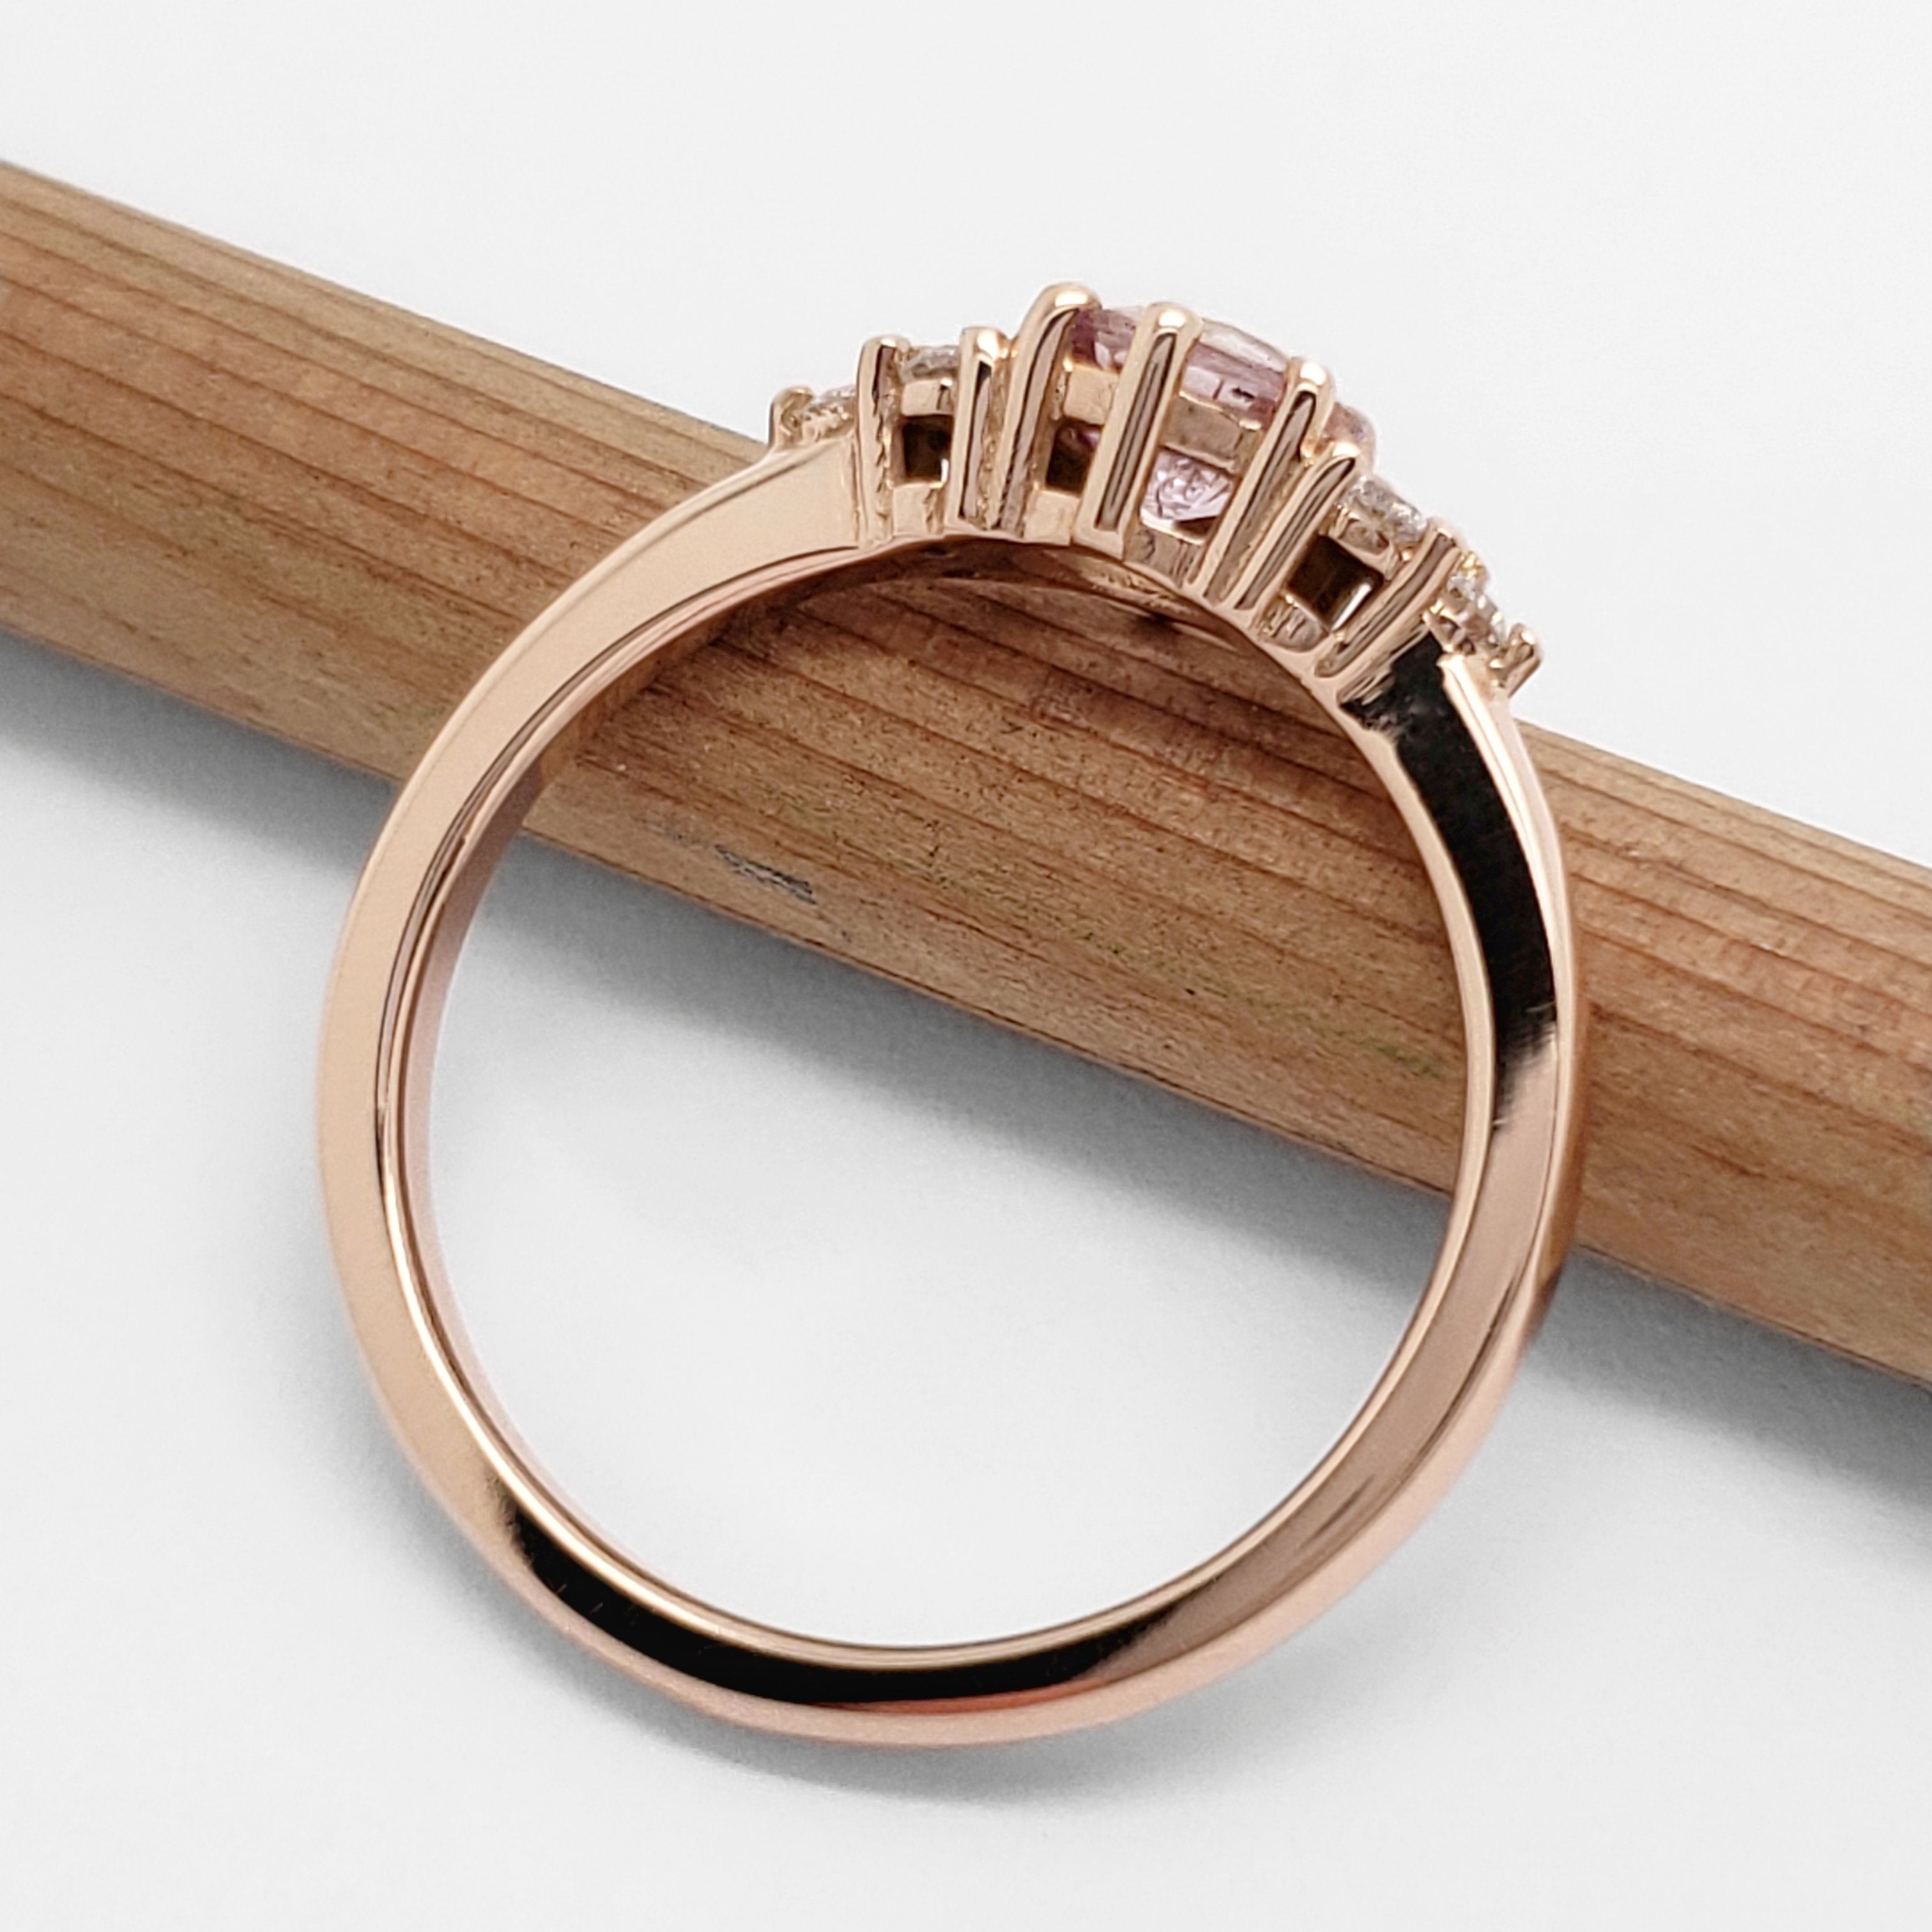 Pink Sapphire Engagement Ring | Era Design Vancouver Canada